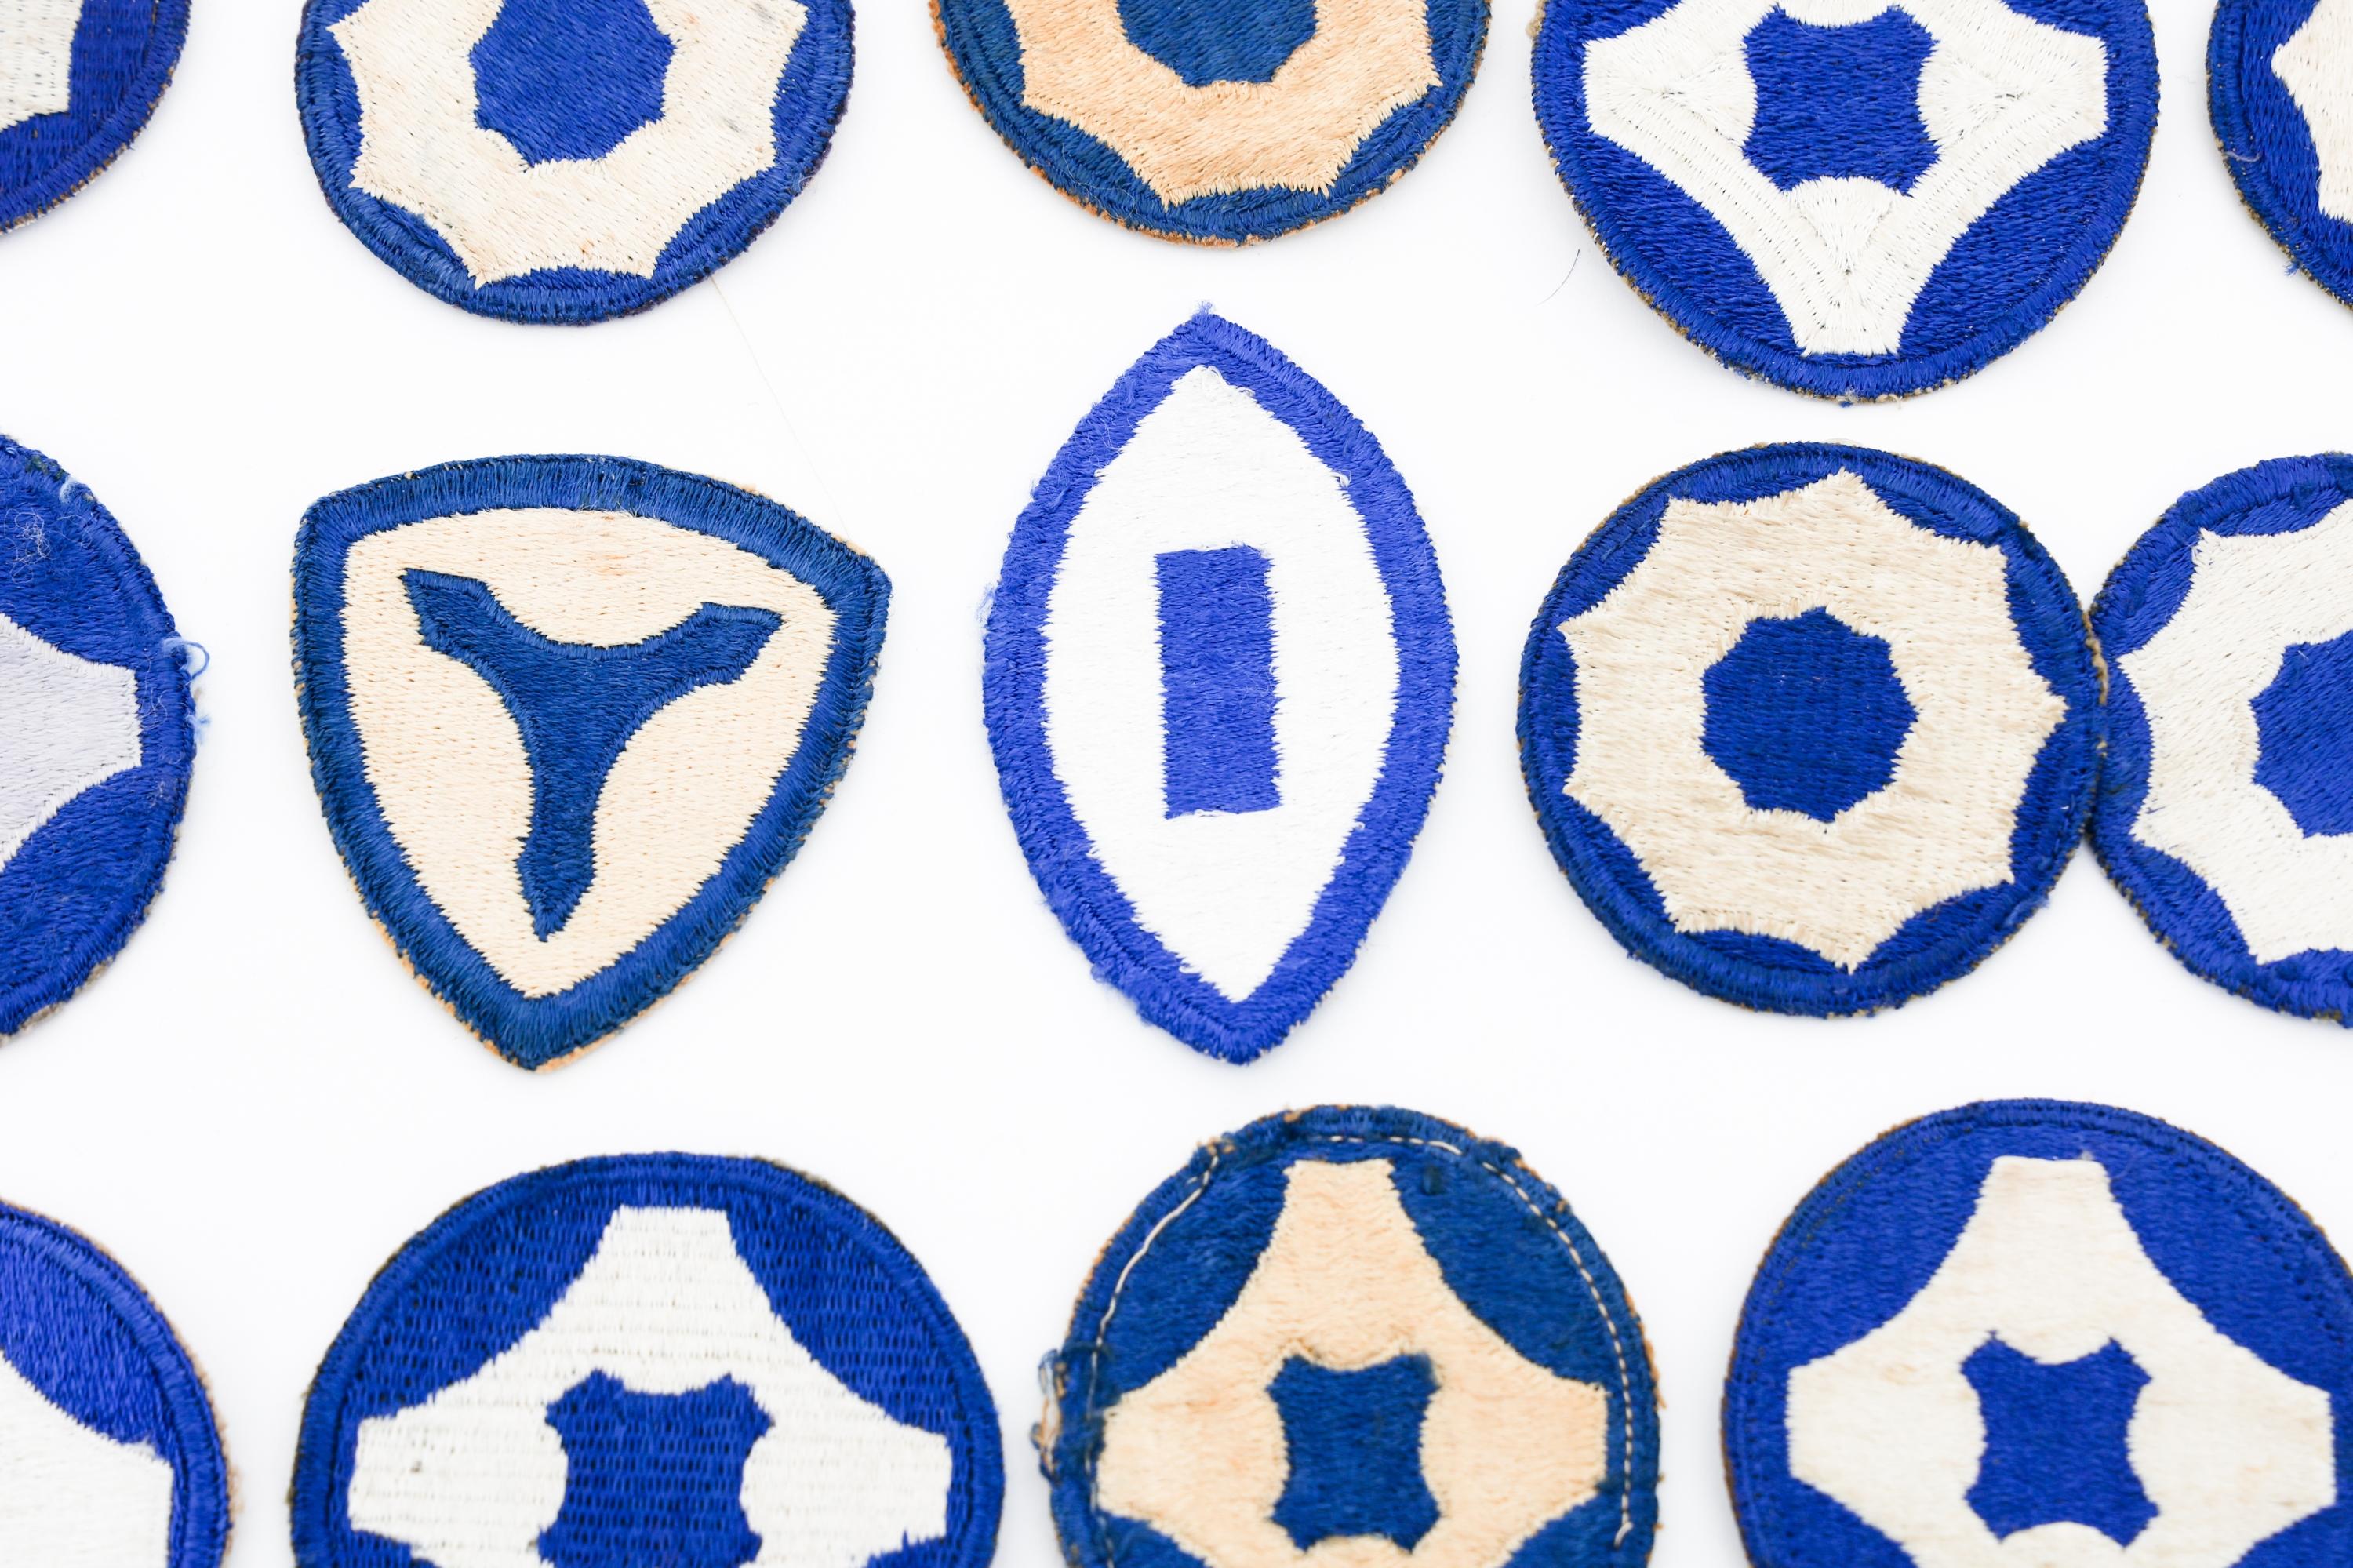 WWII - POST WAR US ARMY SERVICE COMMAND PATCHES